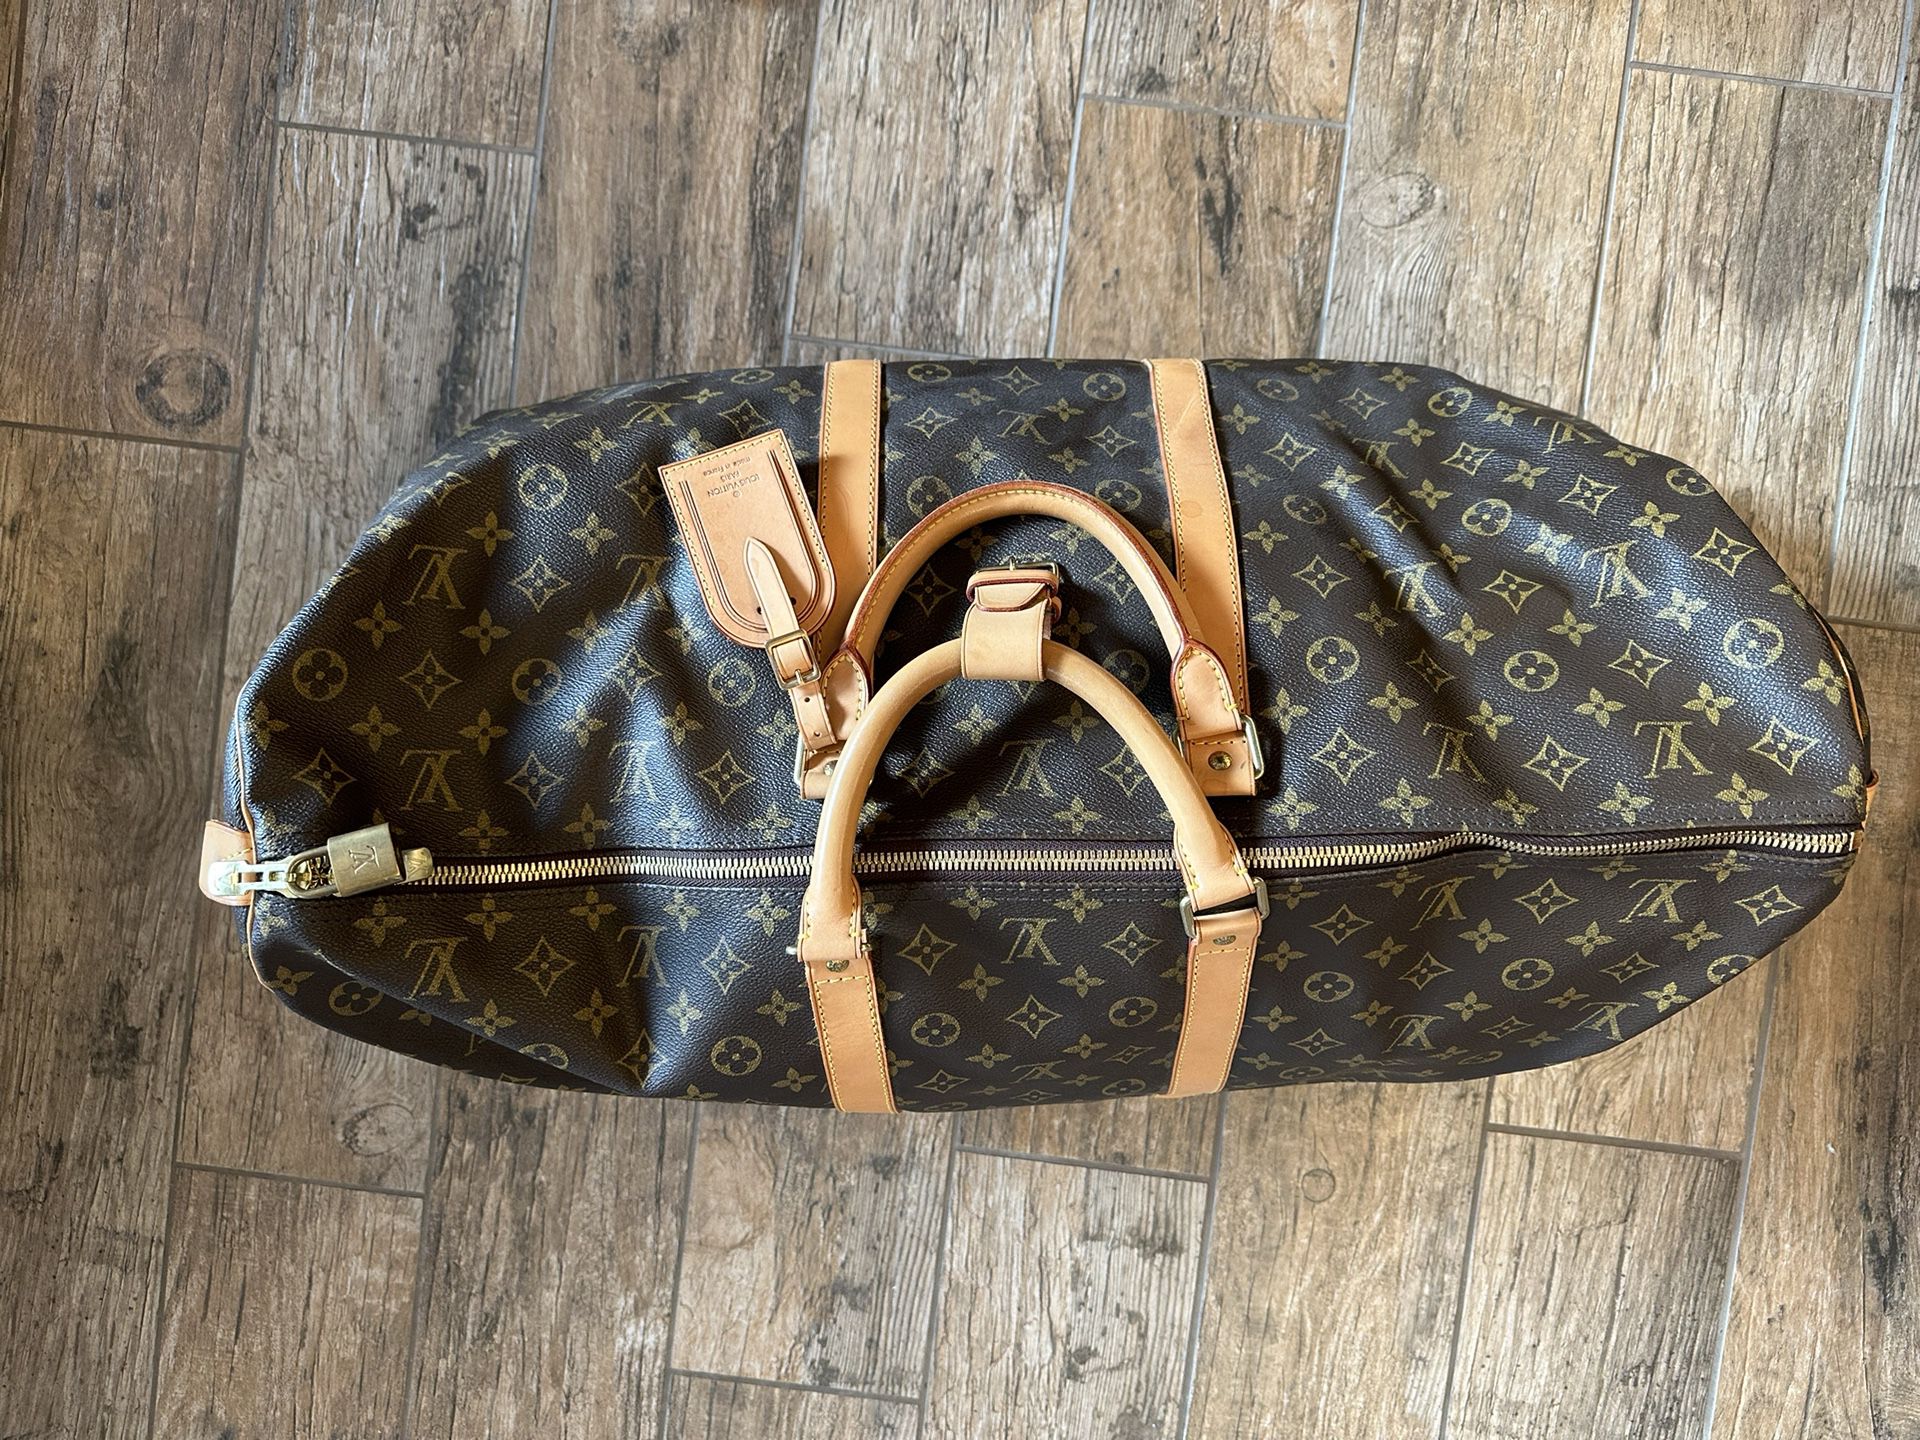 Amyluxurycollection - ❌SOLD❌ PRE-LOVED ❤️LOUIS VUITTON❤️ DUFFLE BAG MONOGRAM